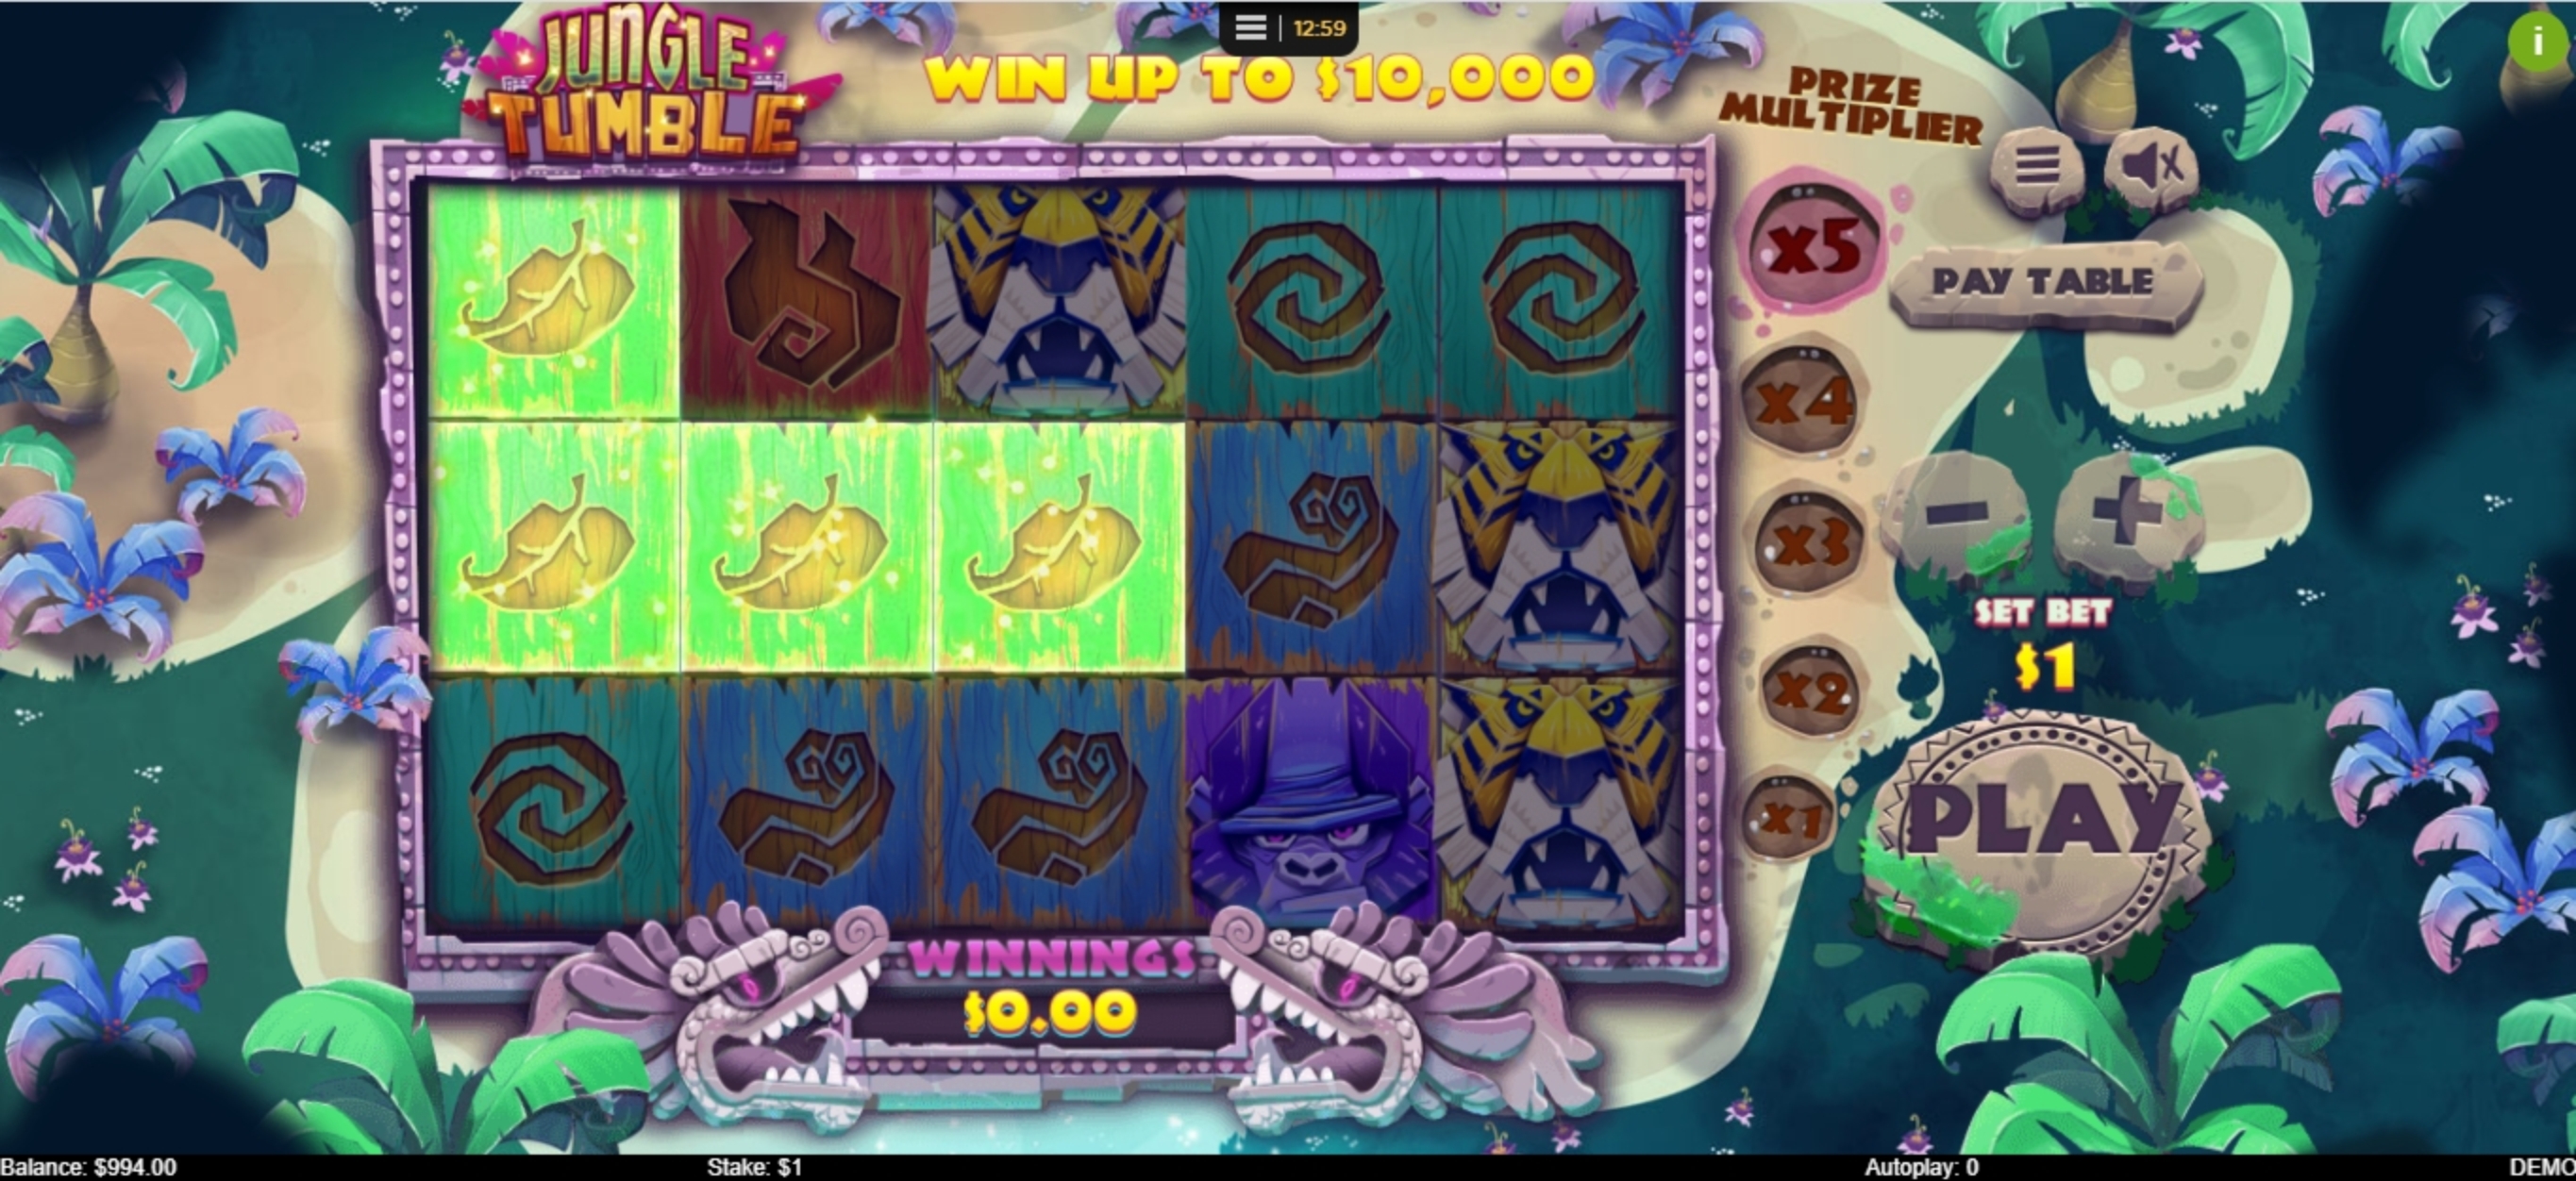 Win Money in Jungle Tumble Free Slot Game by IWG